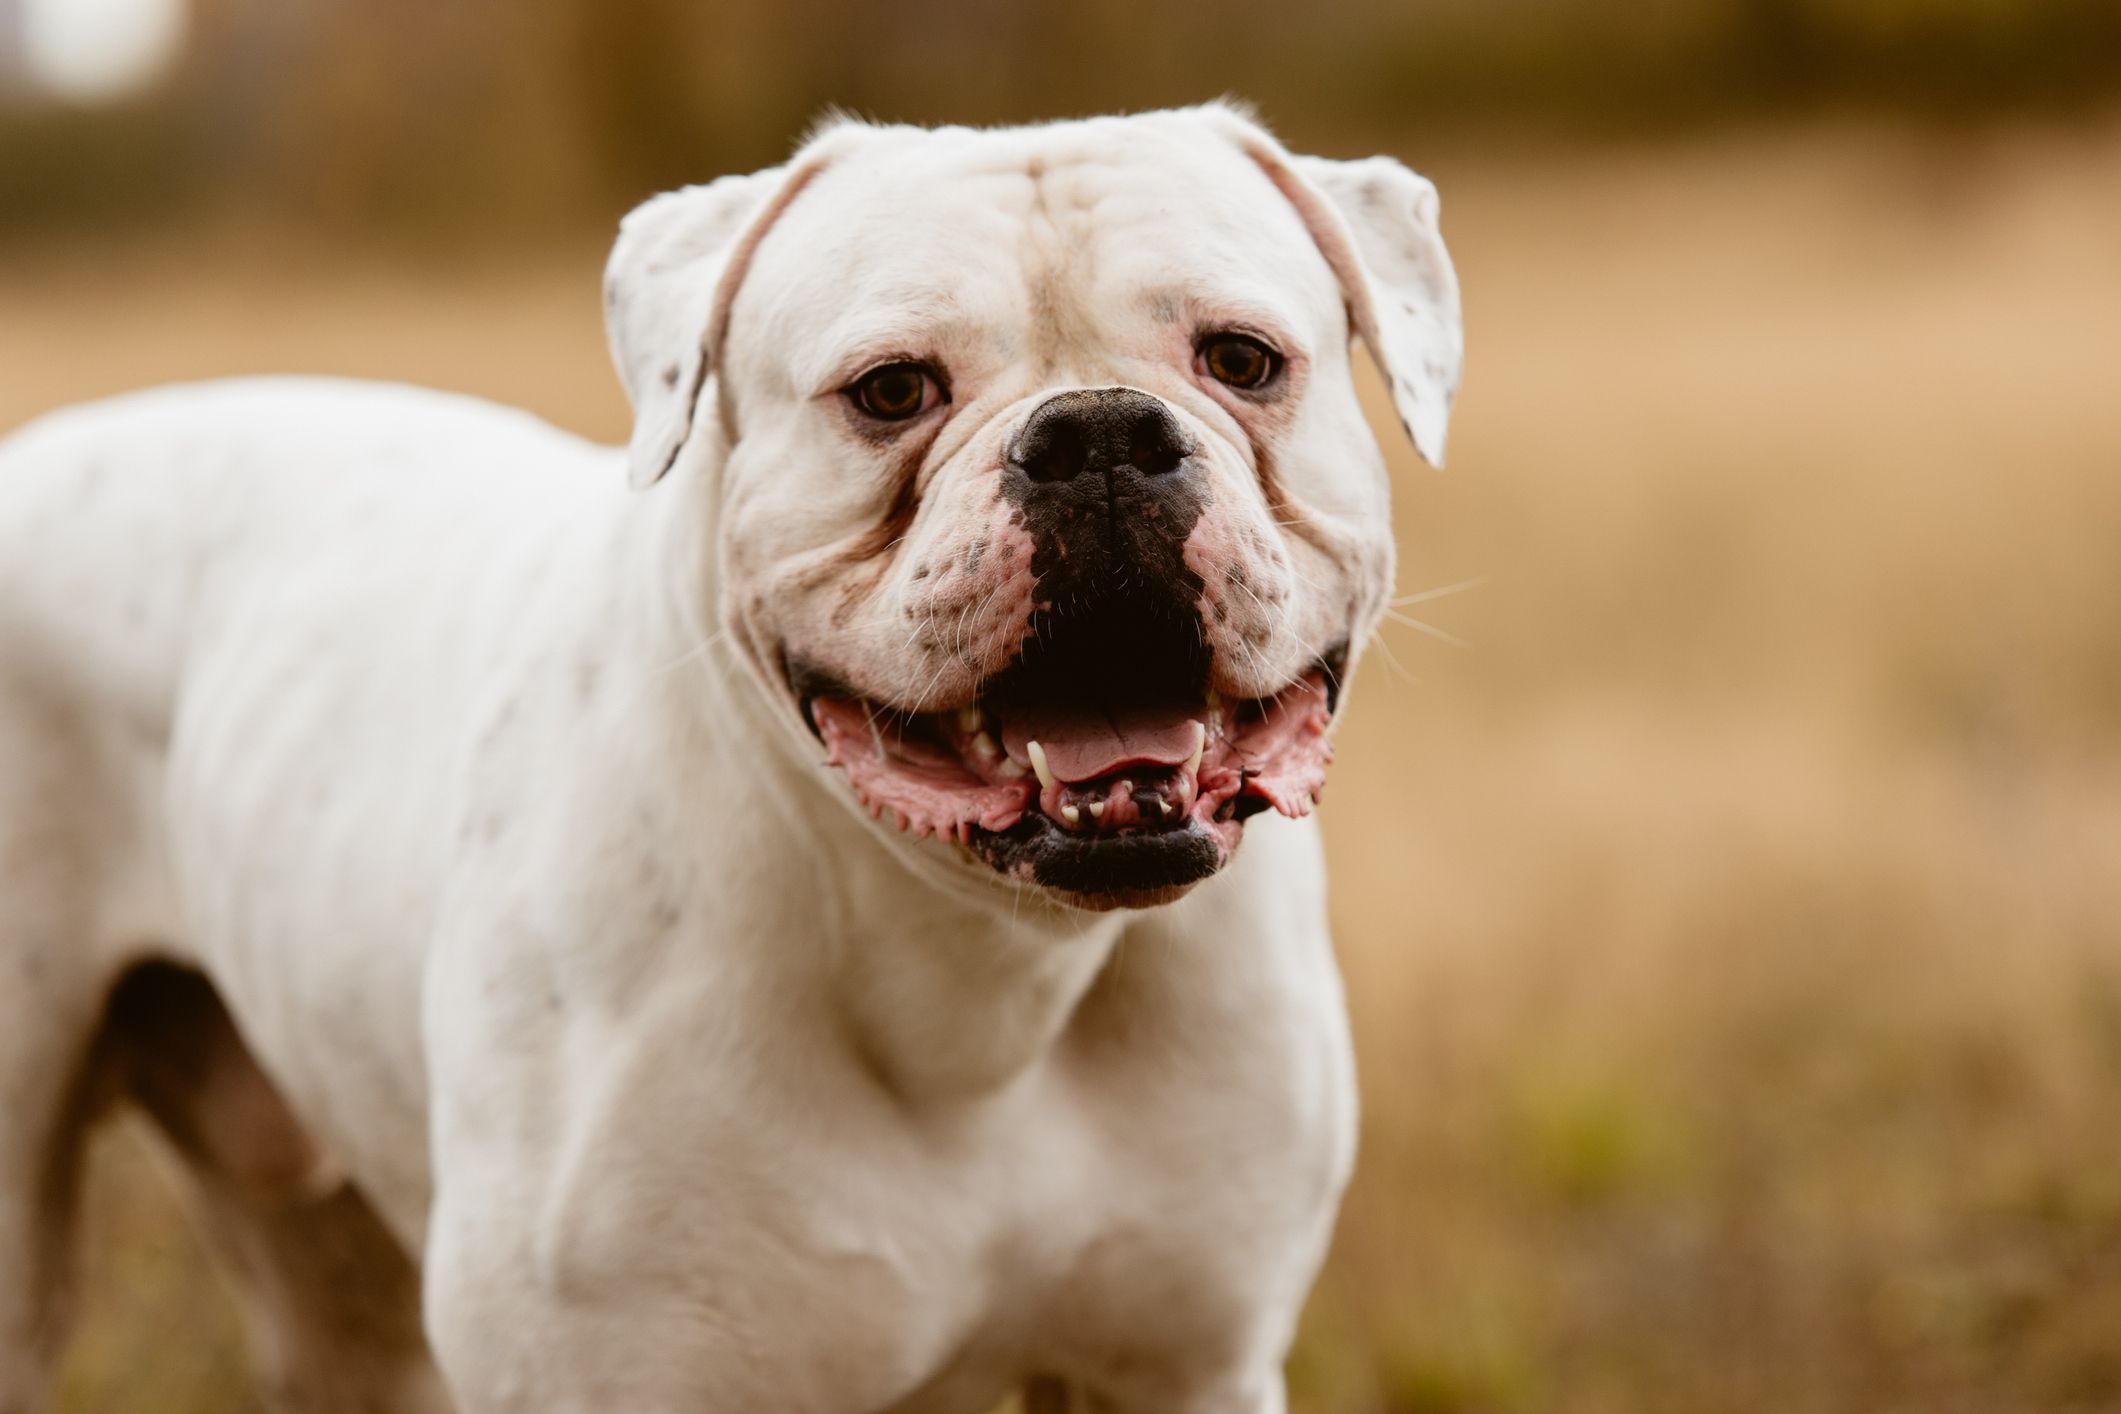 pictures of american bulldogs